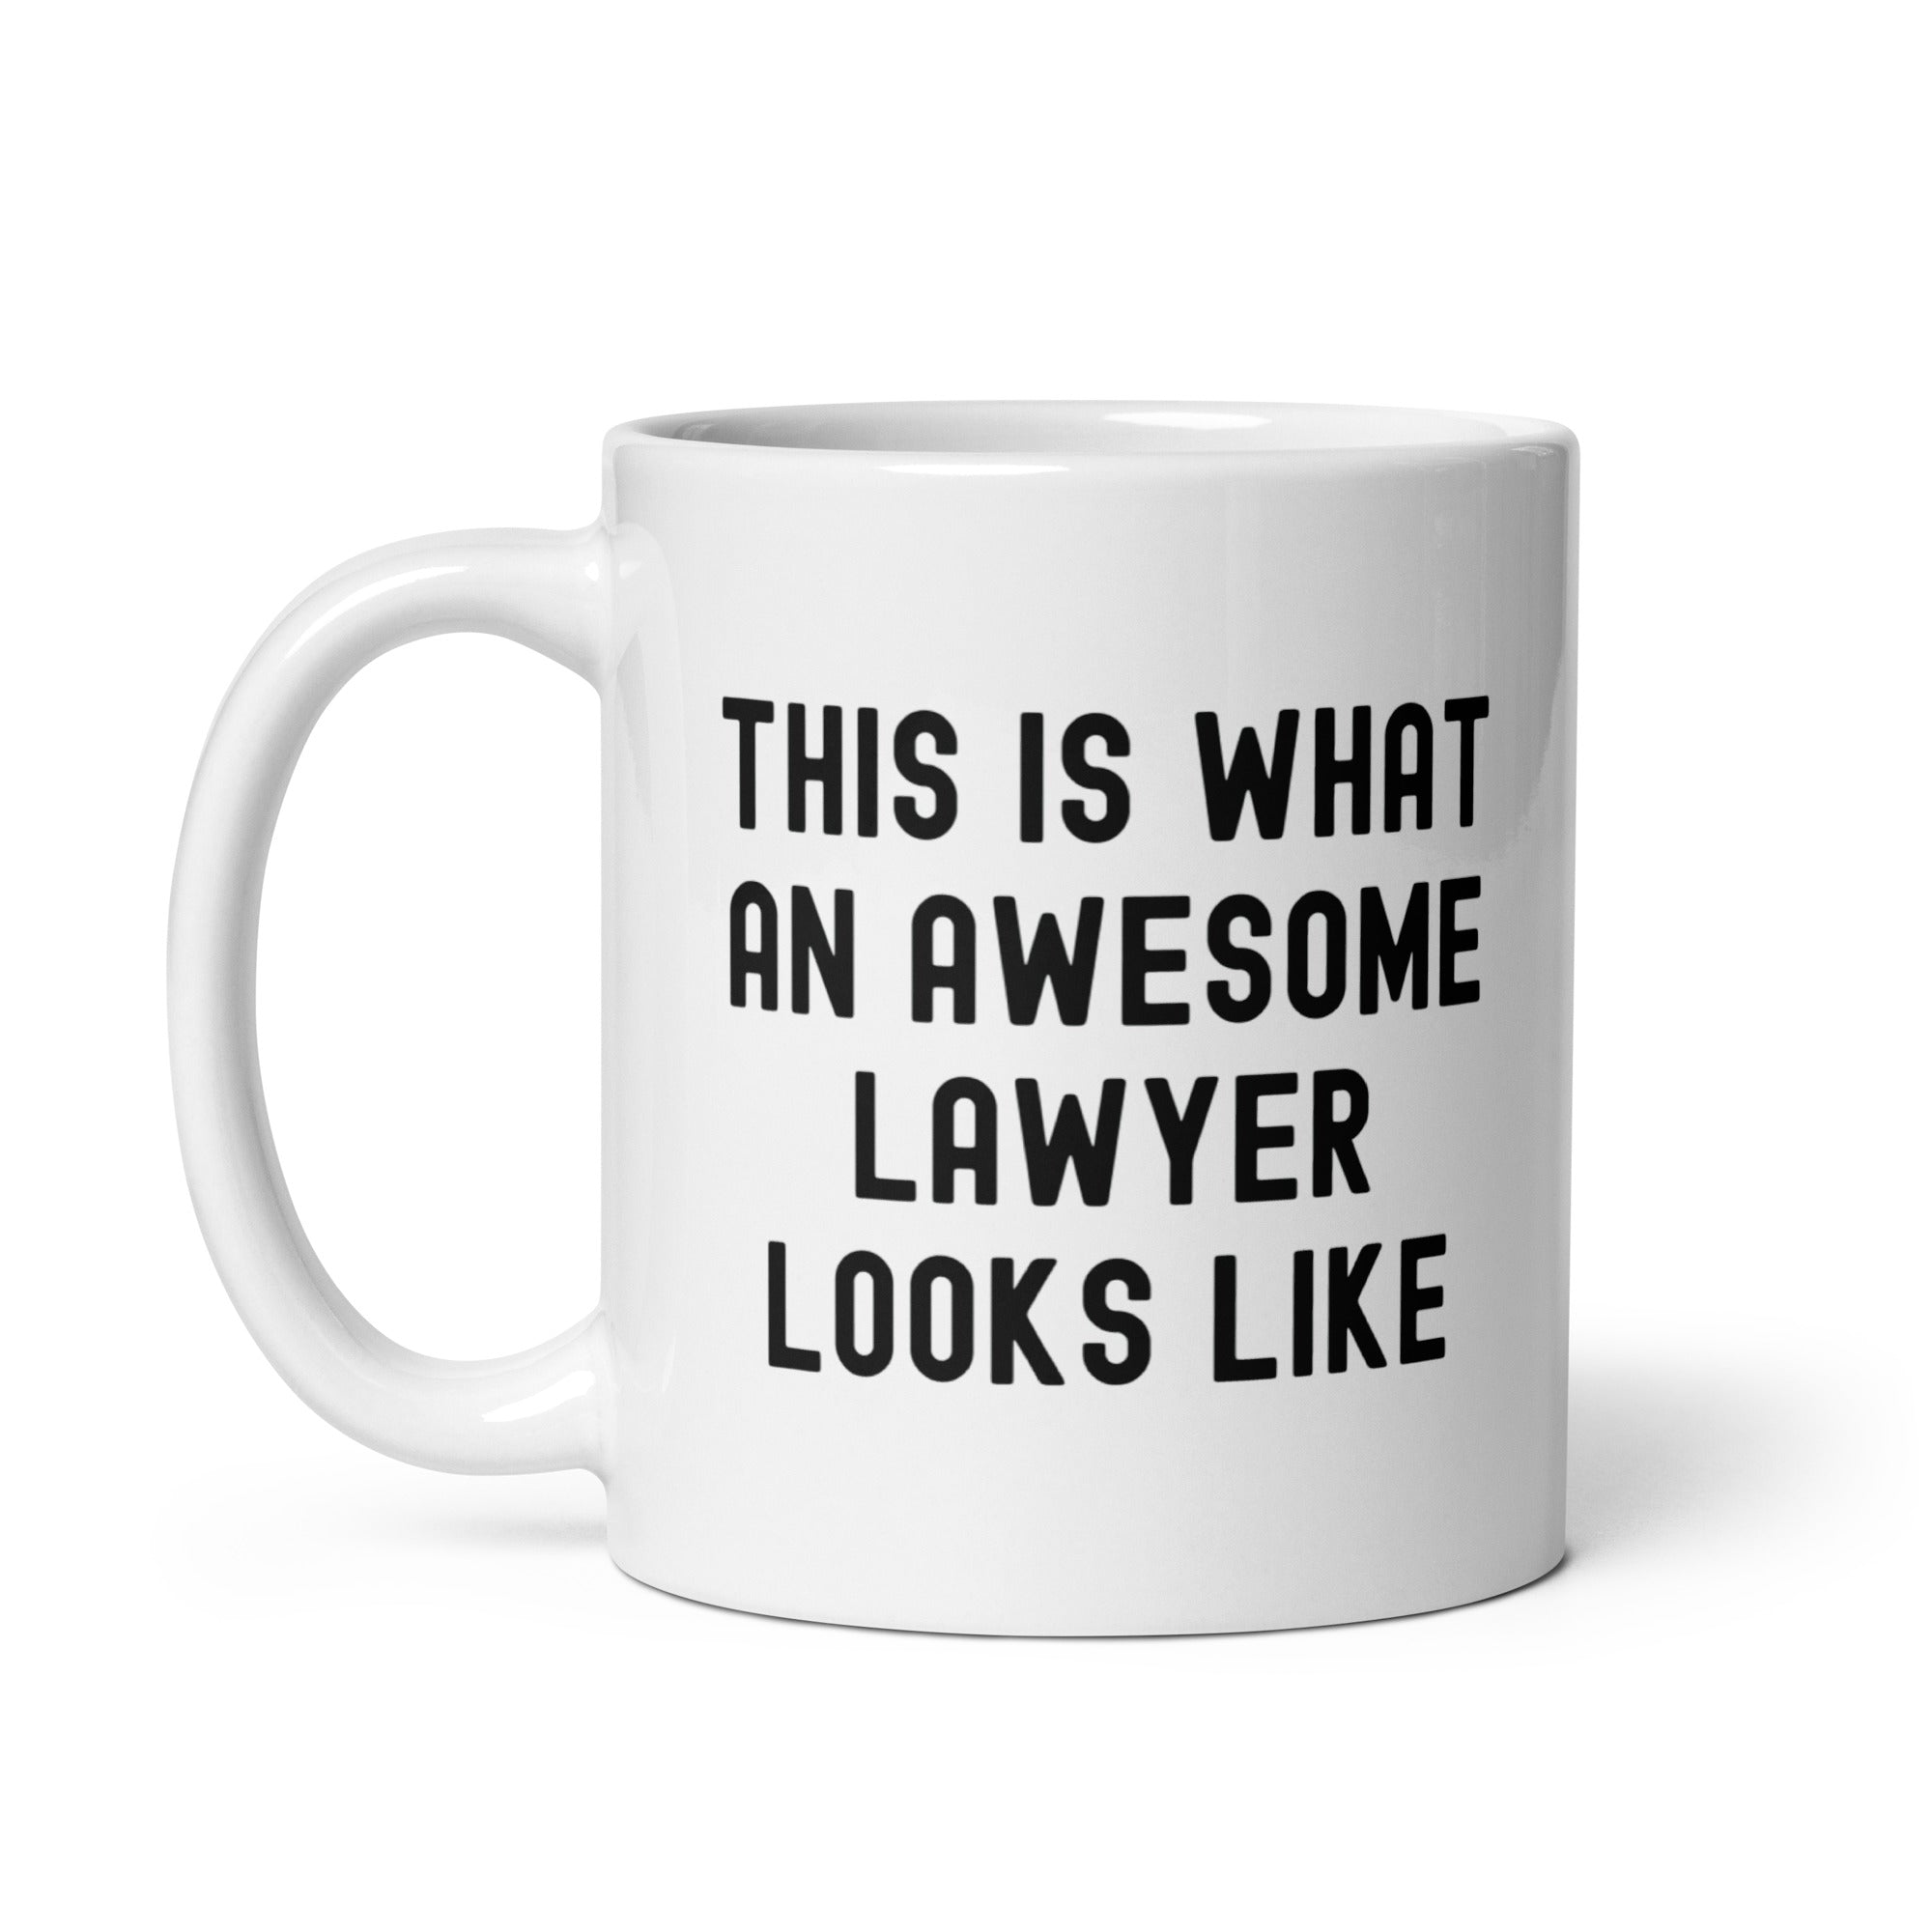 White glossy mug | This is what an awesome lawyer looks like